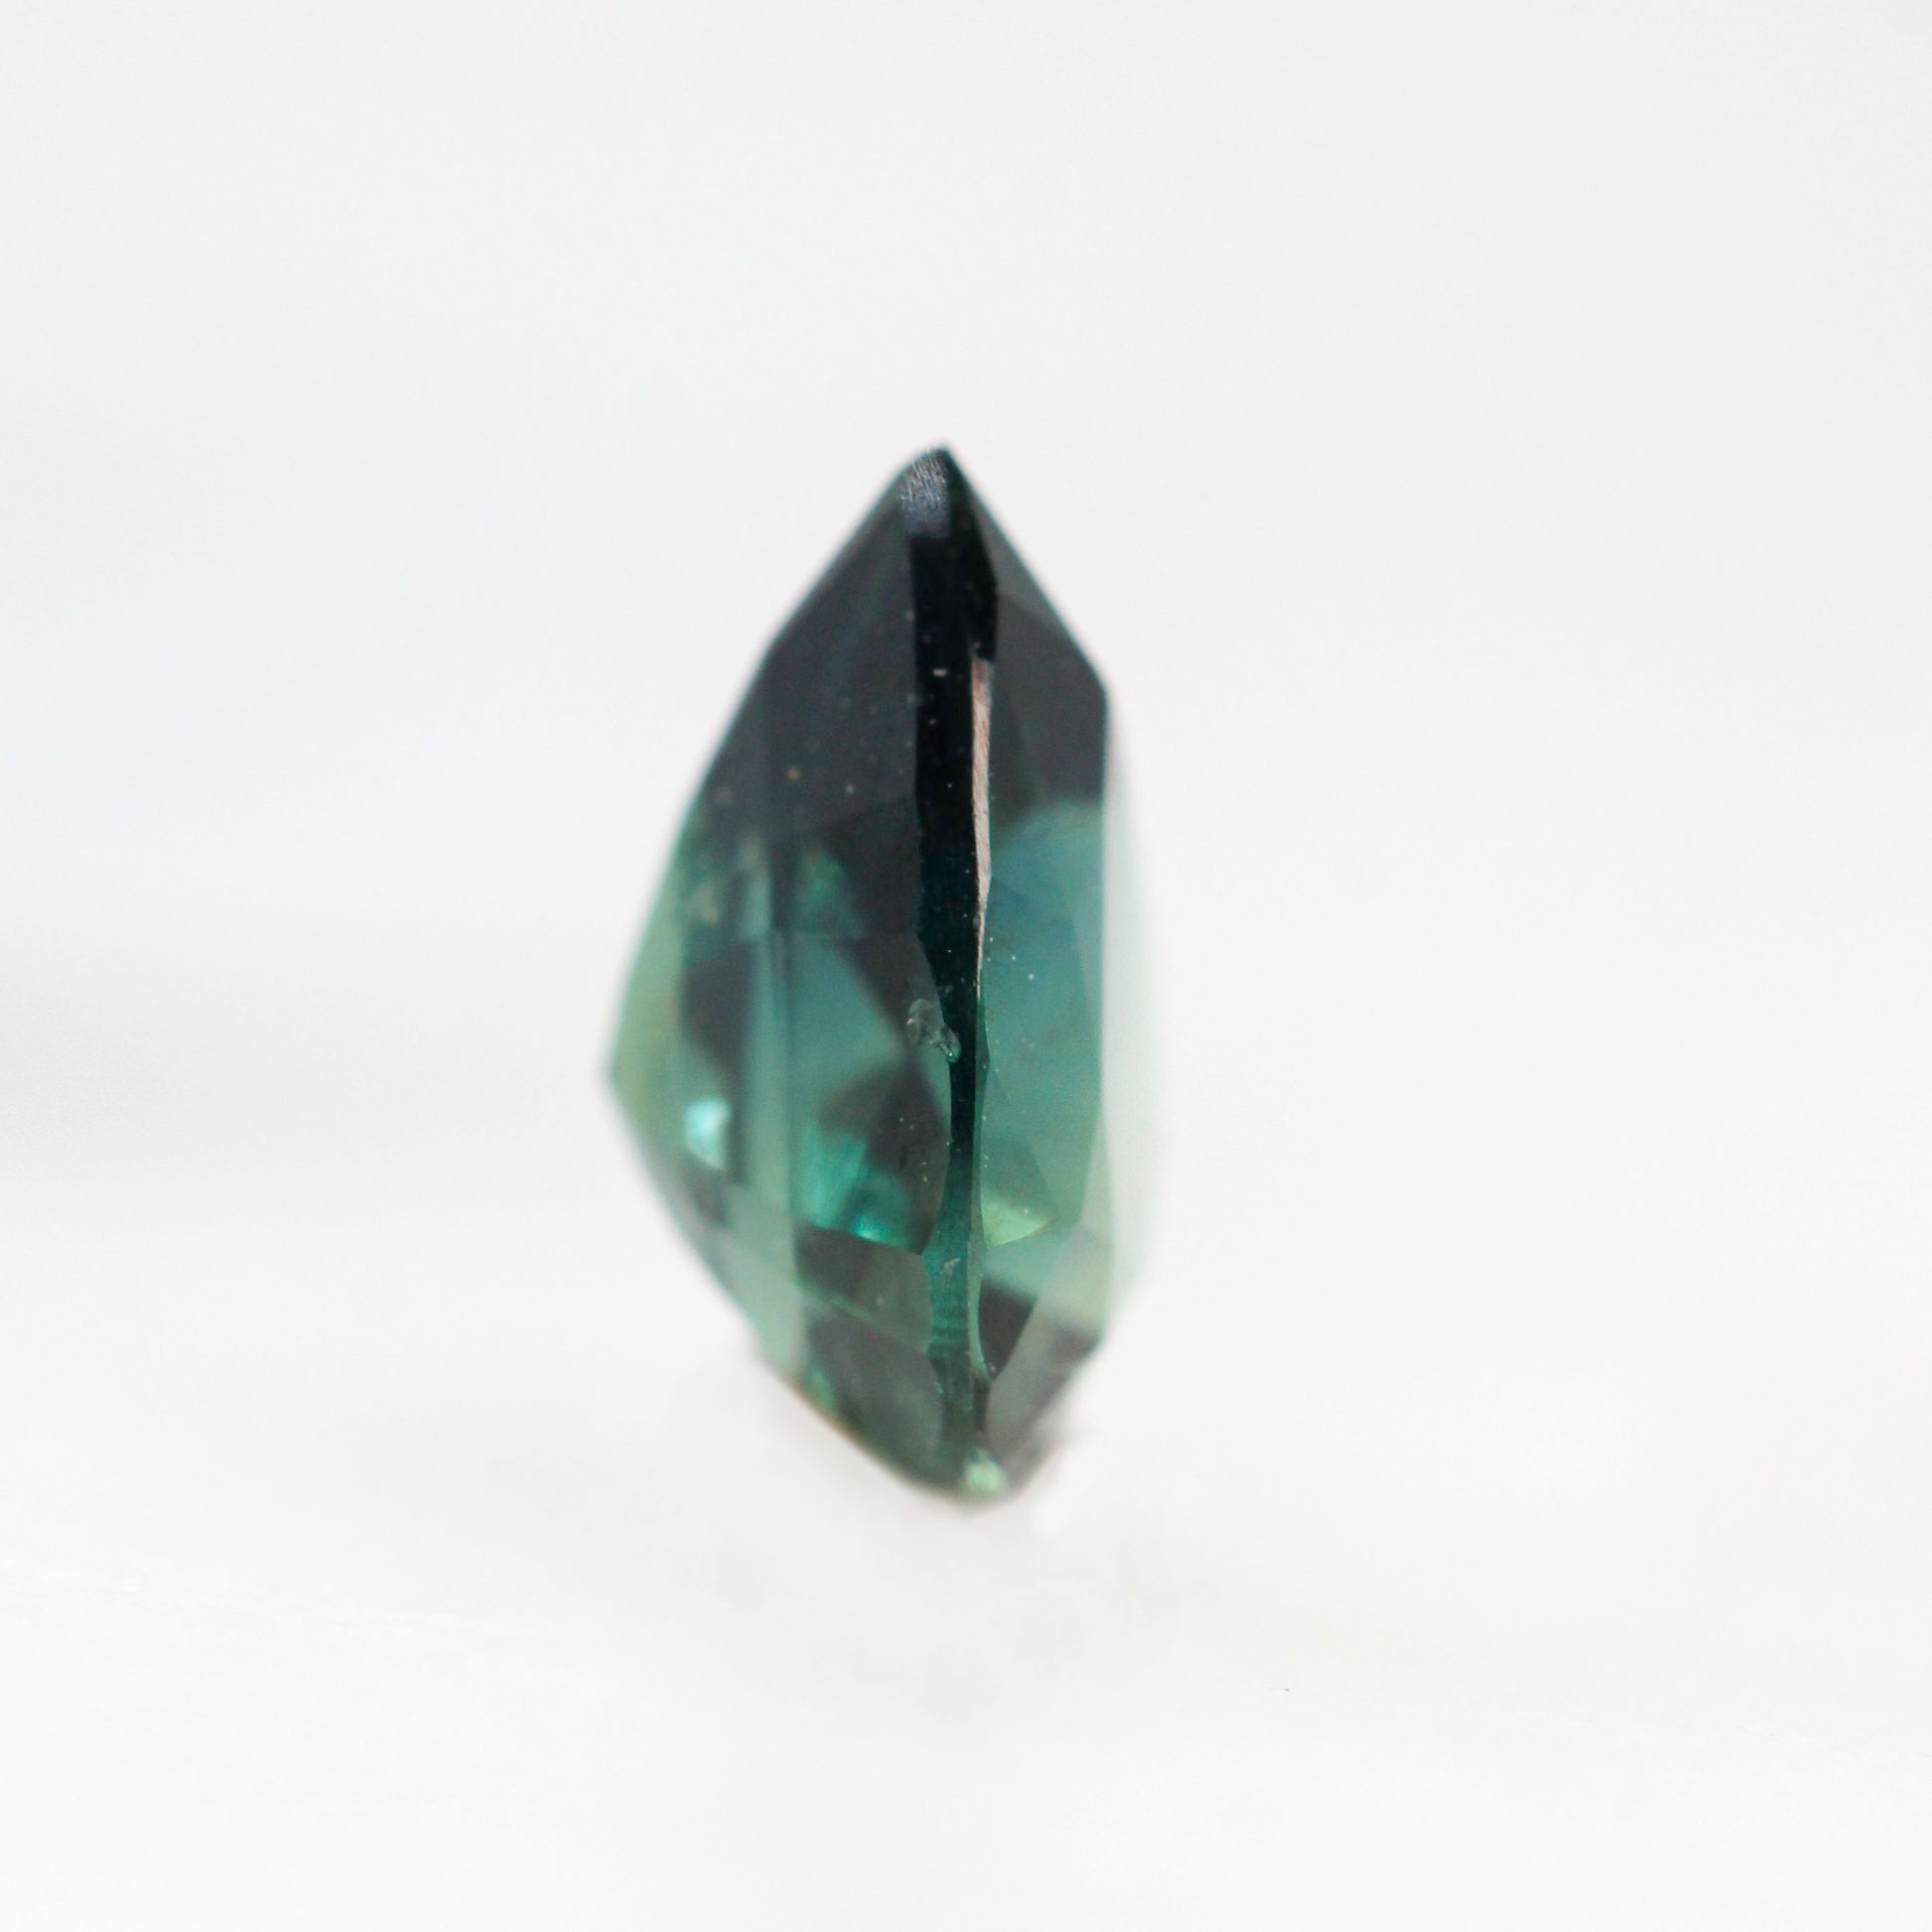 0.97 Carat Green Teal Pear Sapphire for Custom Work - Inventory Code GTPS097 - Midwinter Co. Alternative Bridal Rings and Modern Fine Jewelry